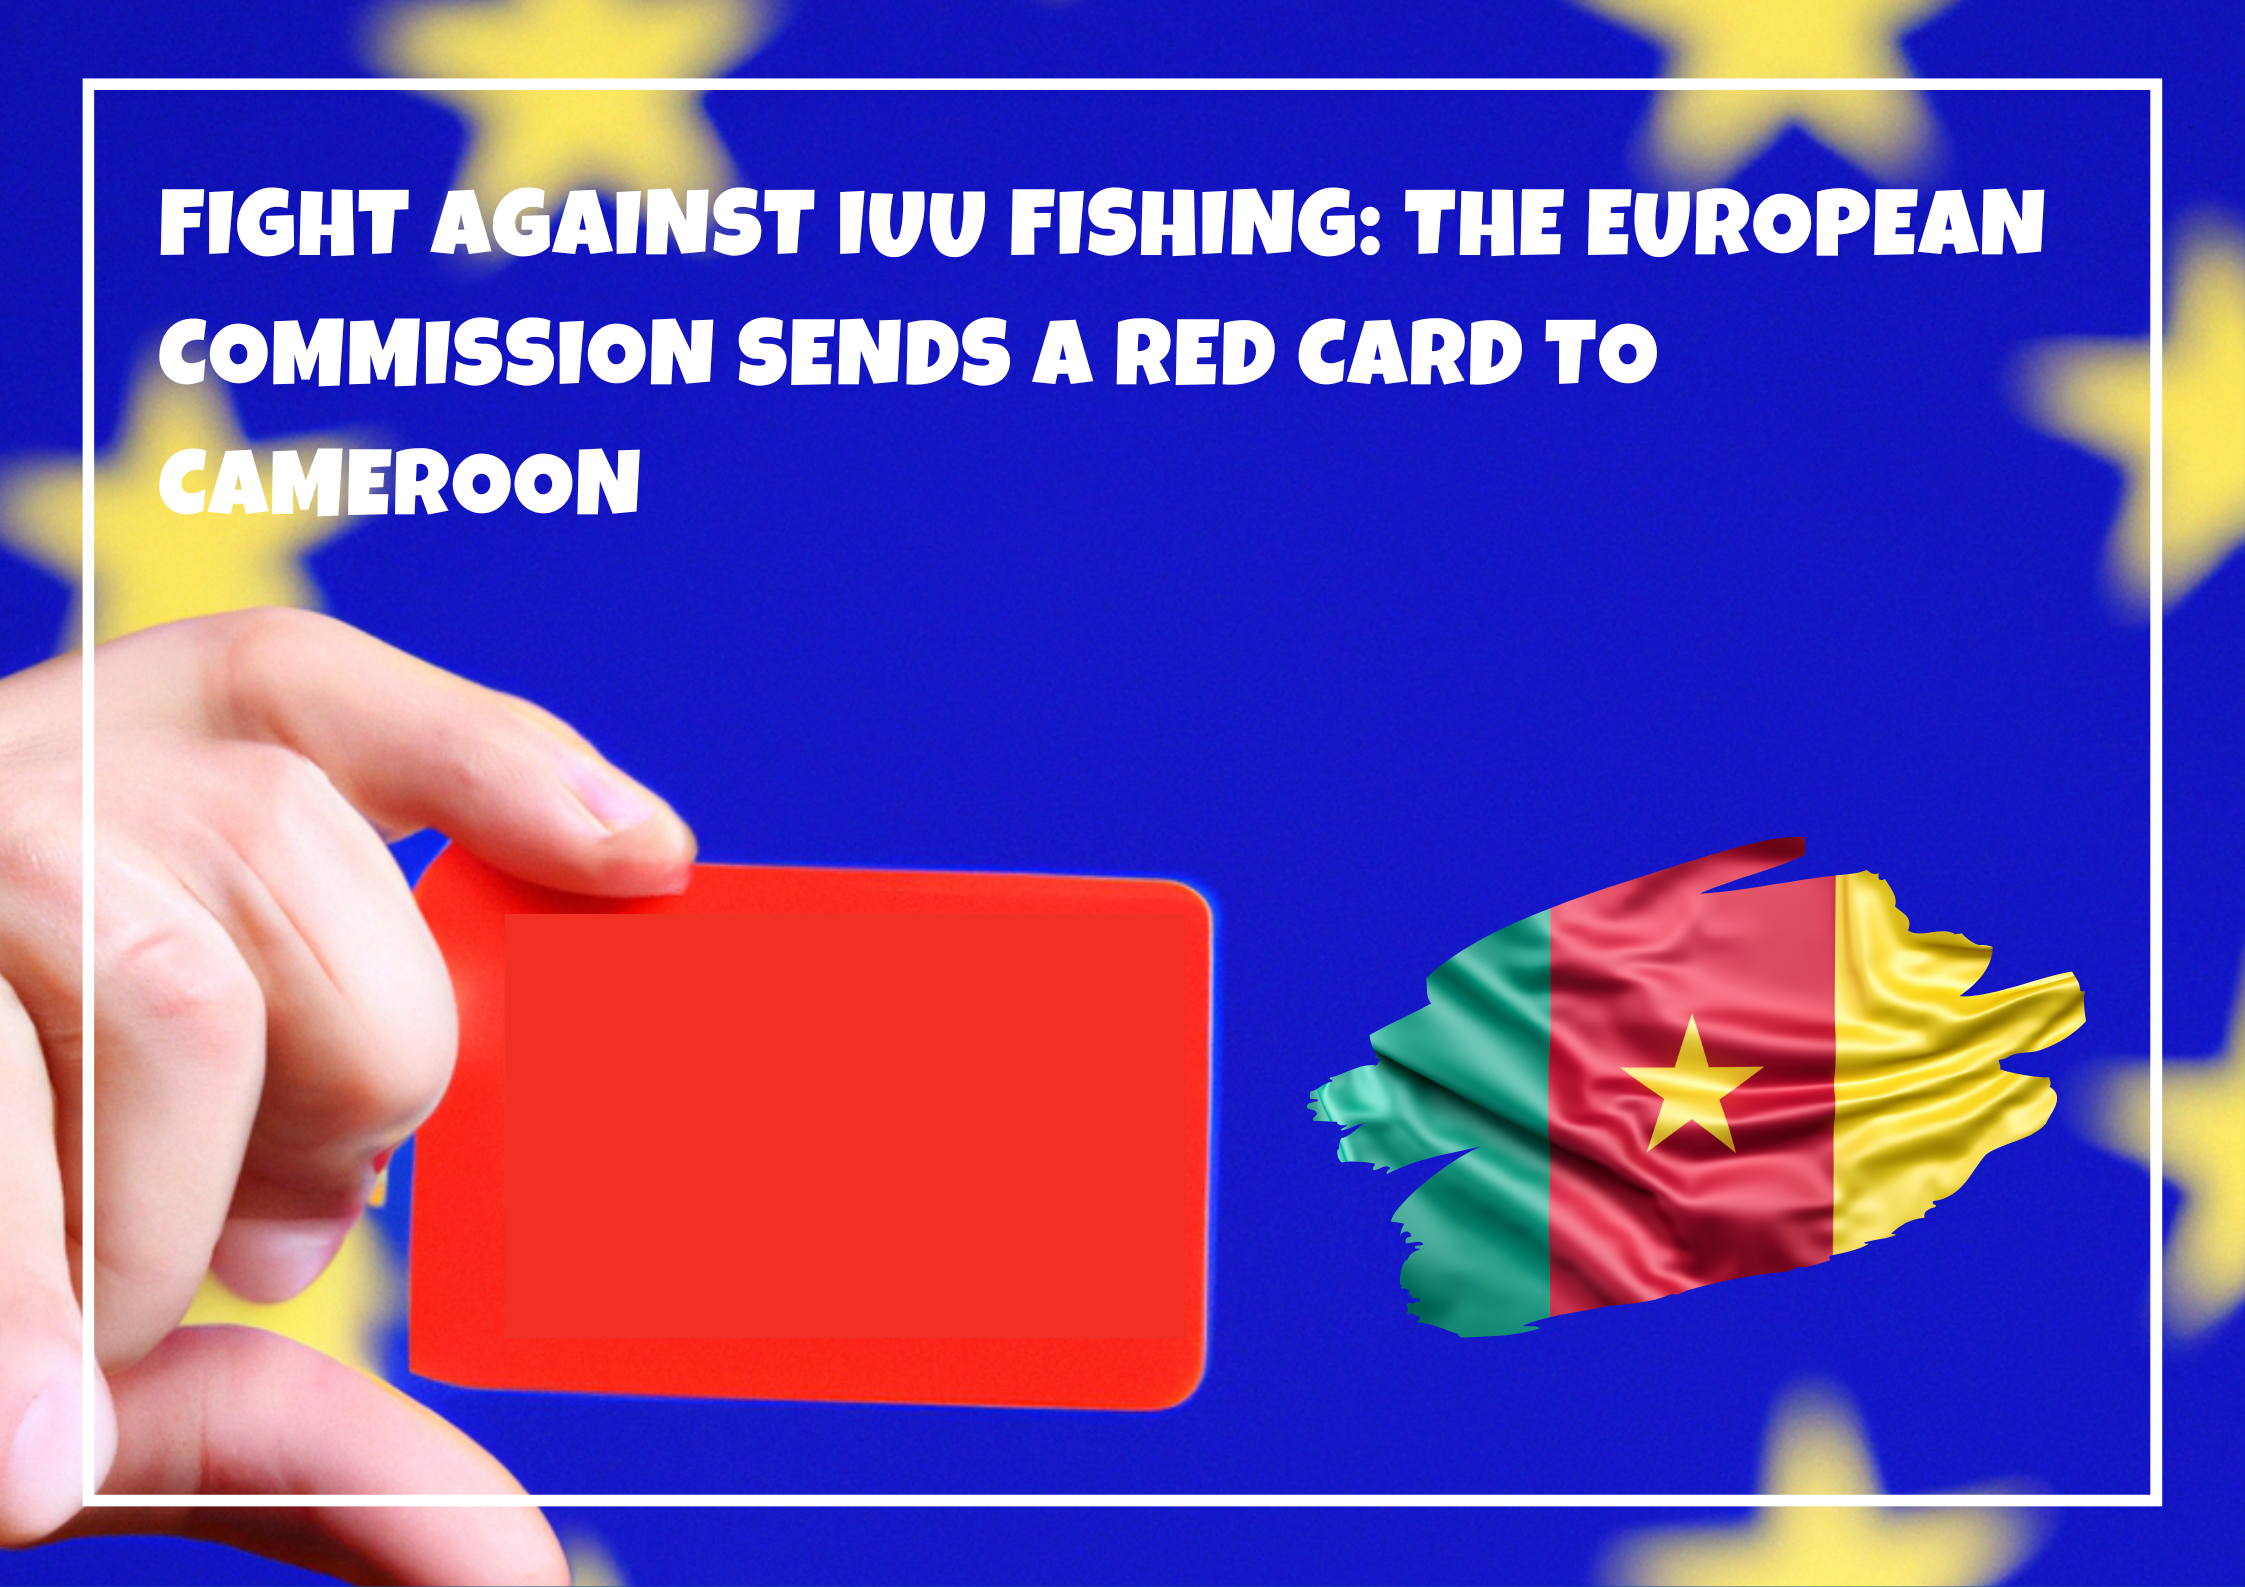 Fight against IUU fishing: the European Commission sends a red card to Cameroon